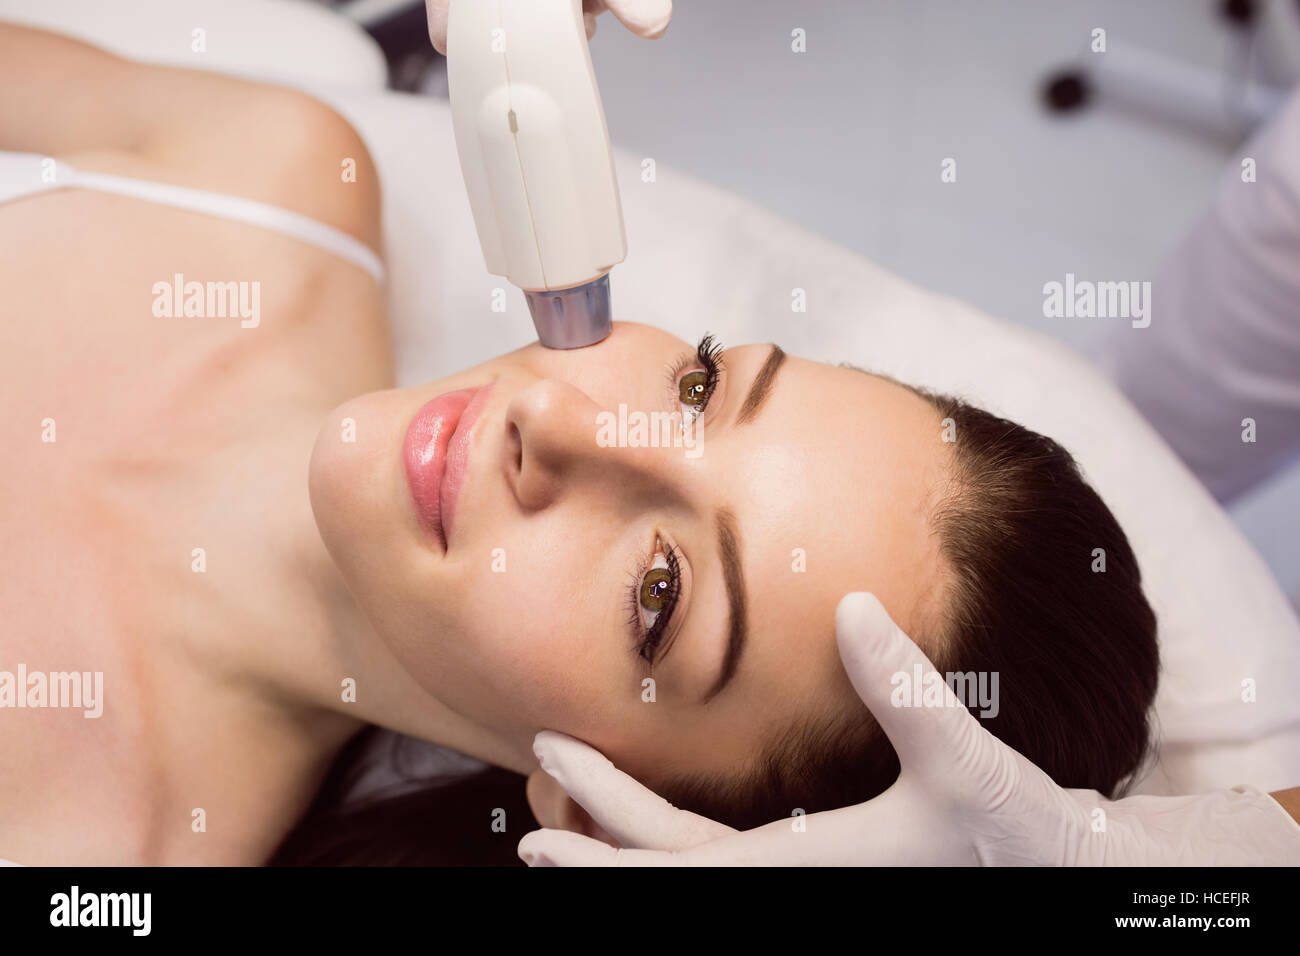 Female patient receiving cosmetic treatment Stock Photo